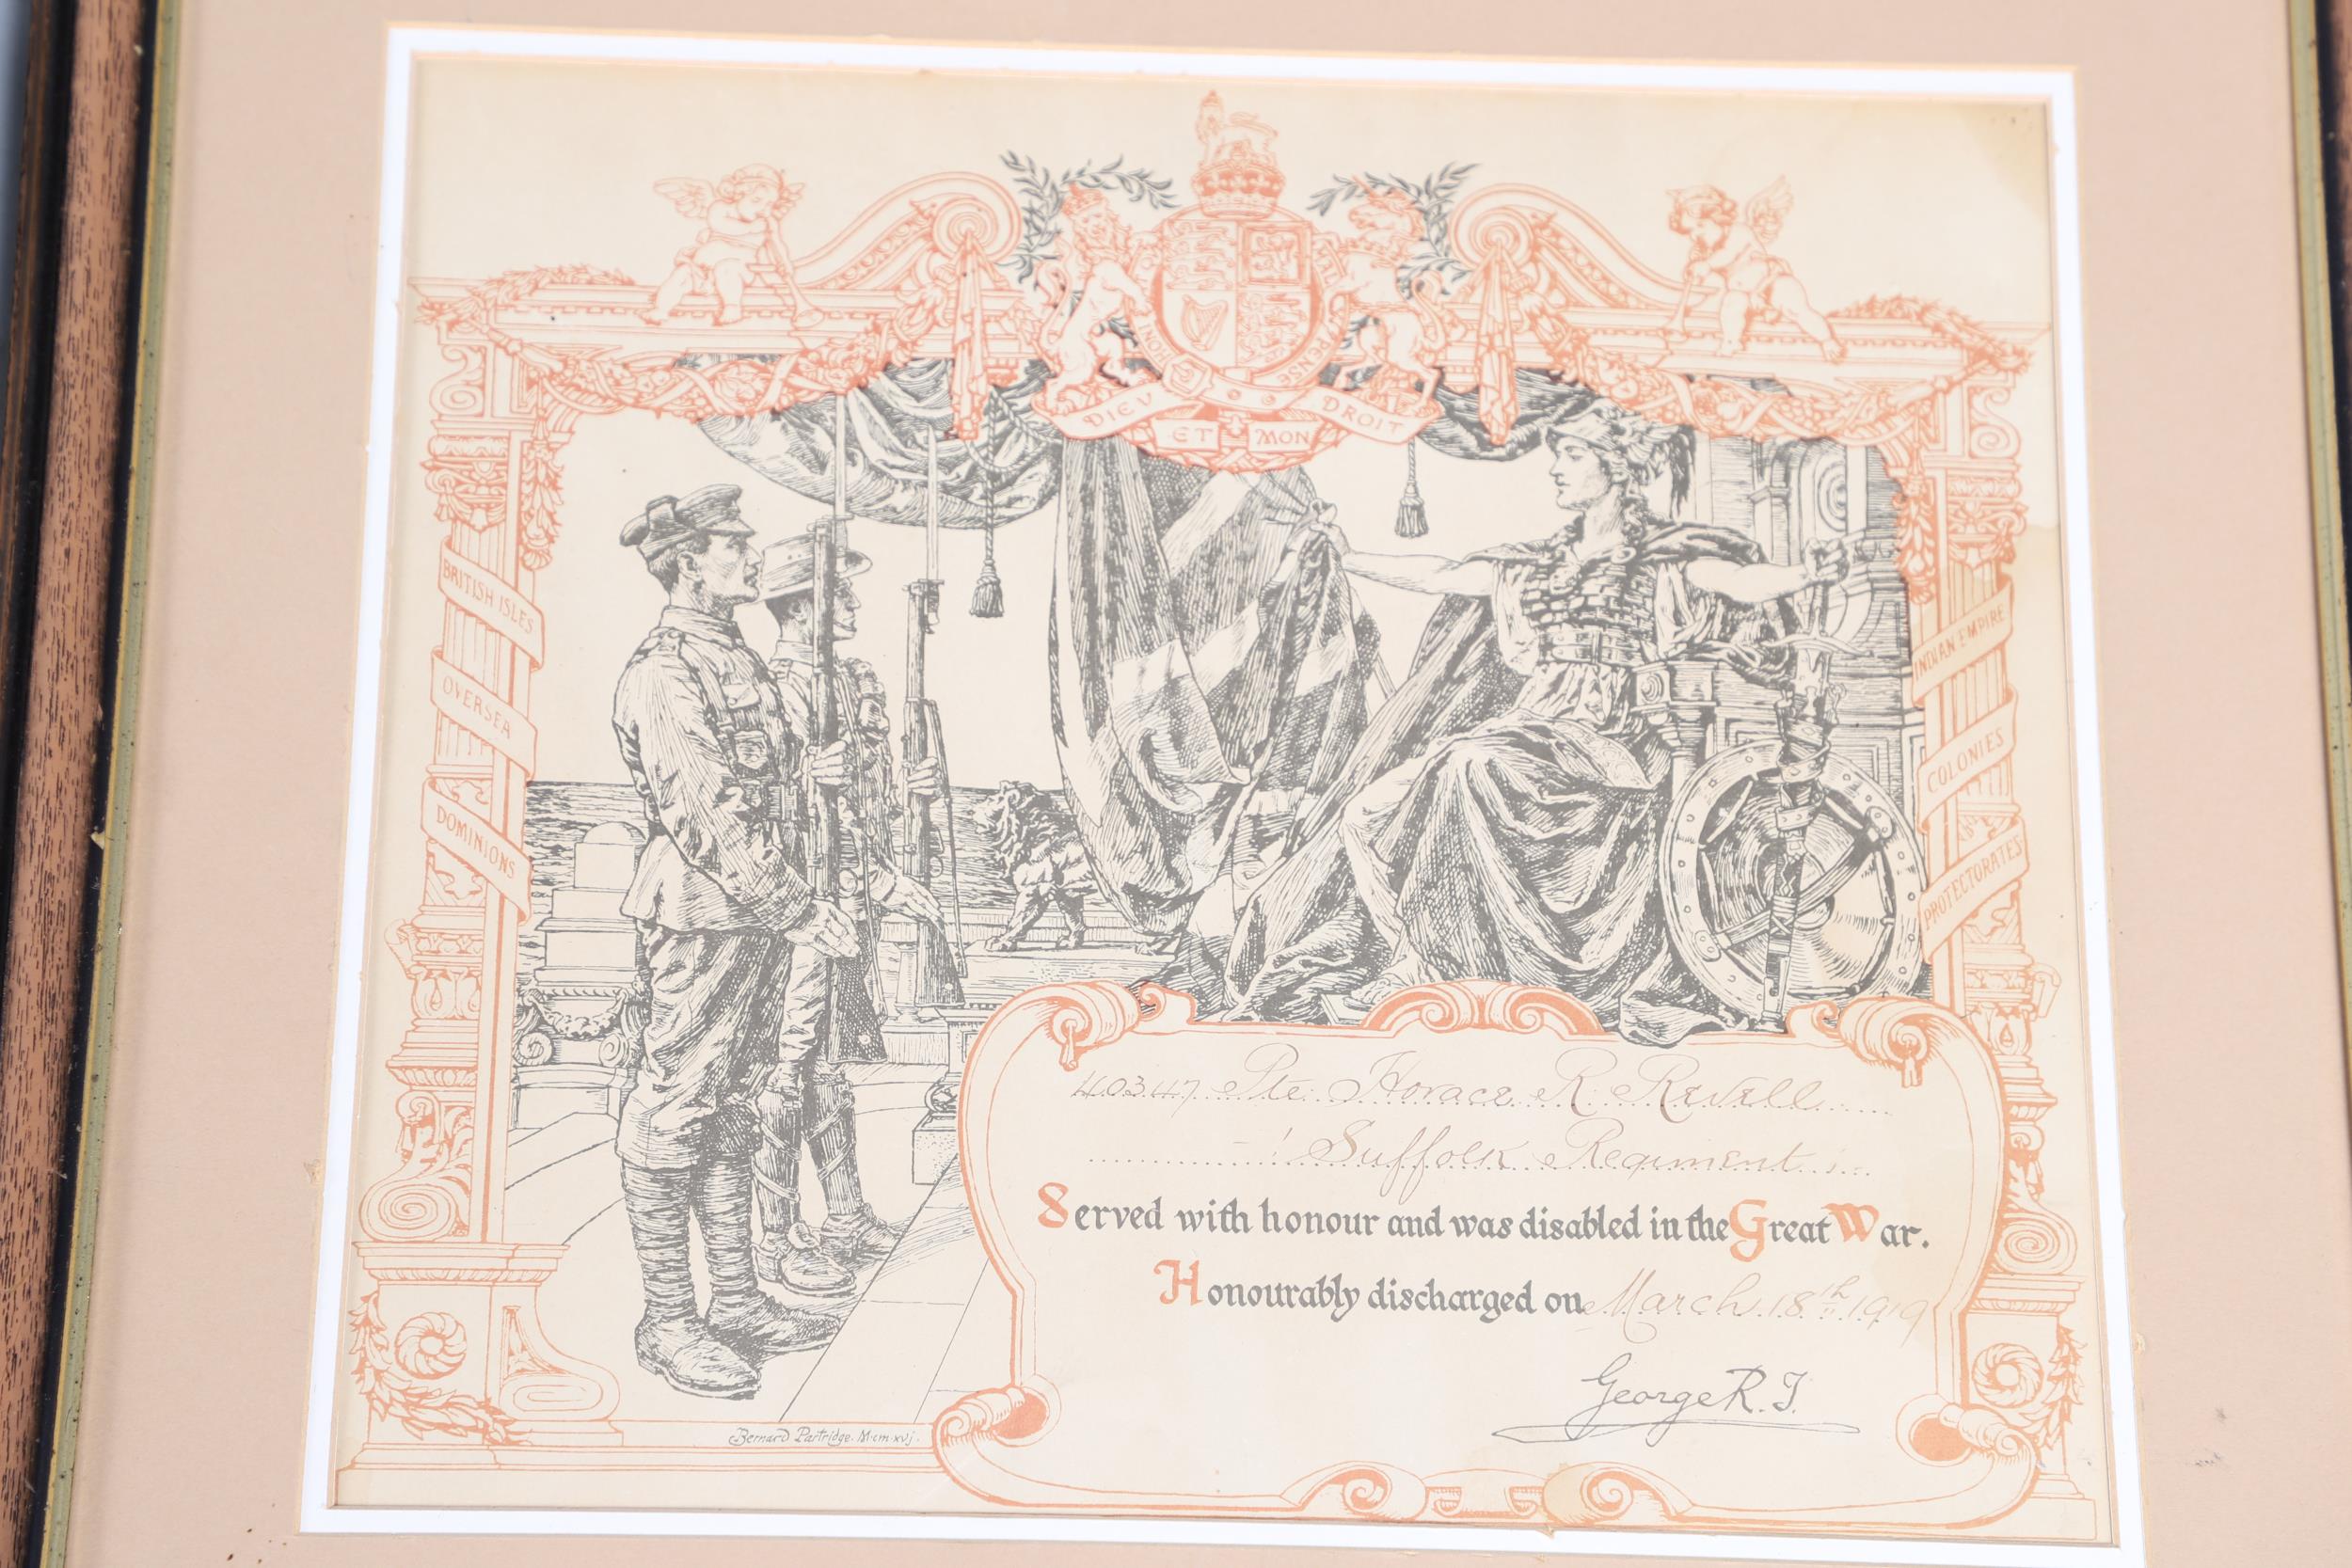 THREE FIRST WORLD HONOURABLE DISCHARGE CERTIFICATES. - Image 9 of 10